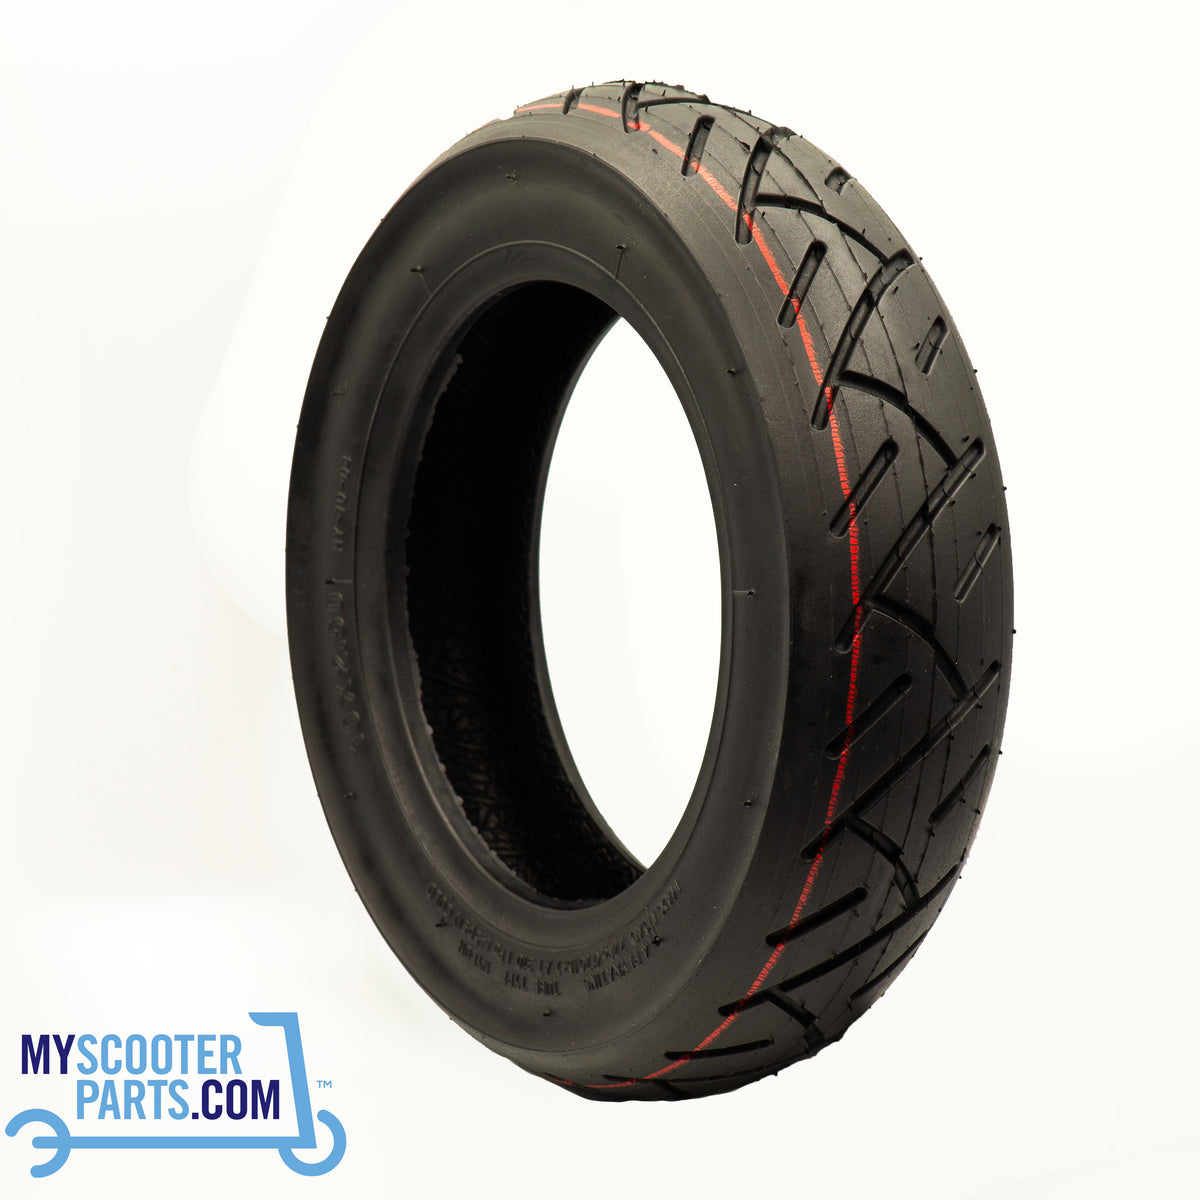 E SCOOTER TYRE 10 x 2.5, XC020 TO SUIT KABOO RANGE DUALTRON ETC FITTING AVAILABLE